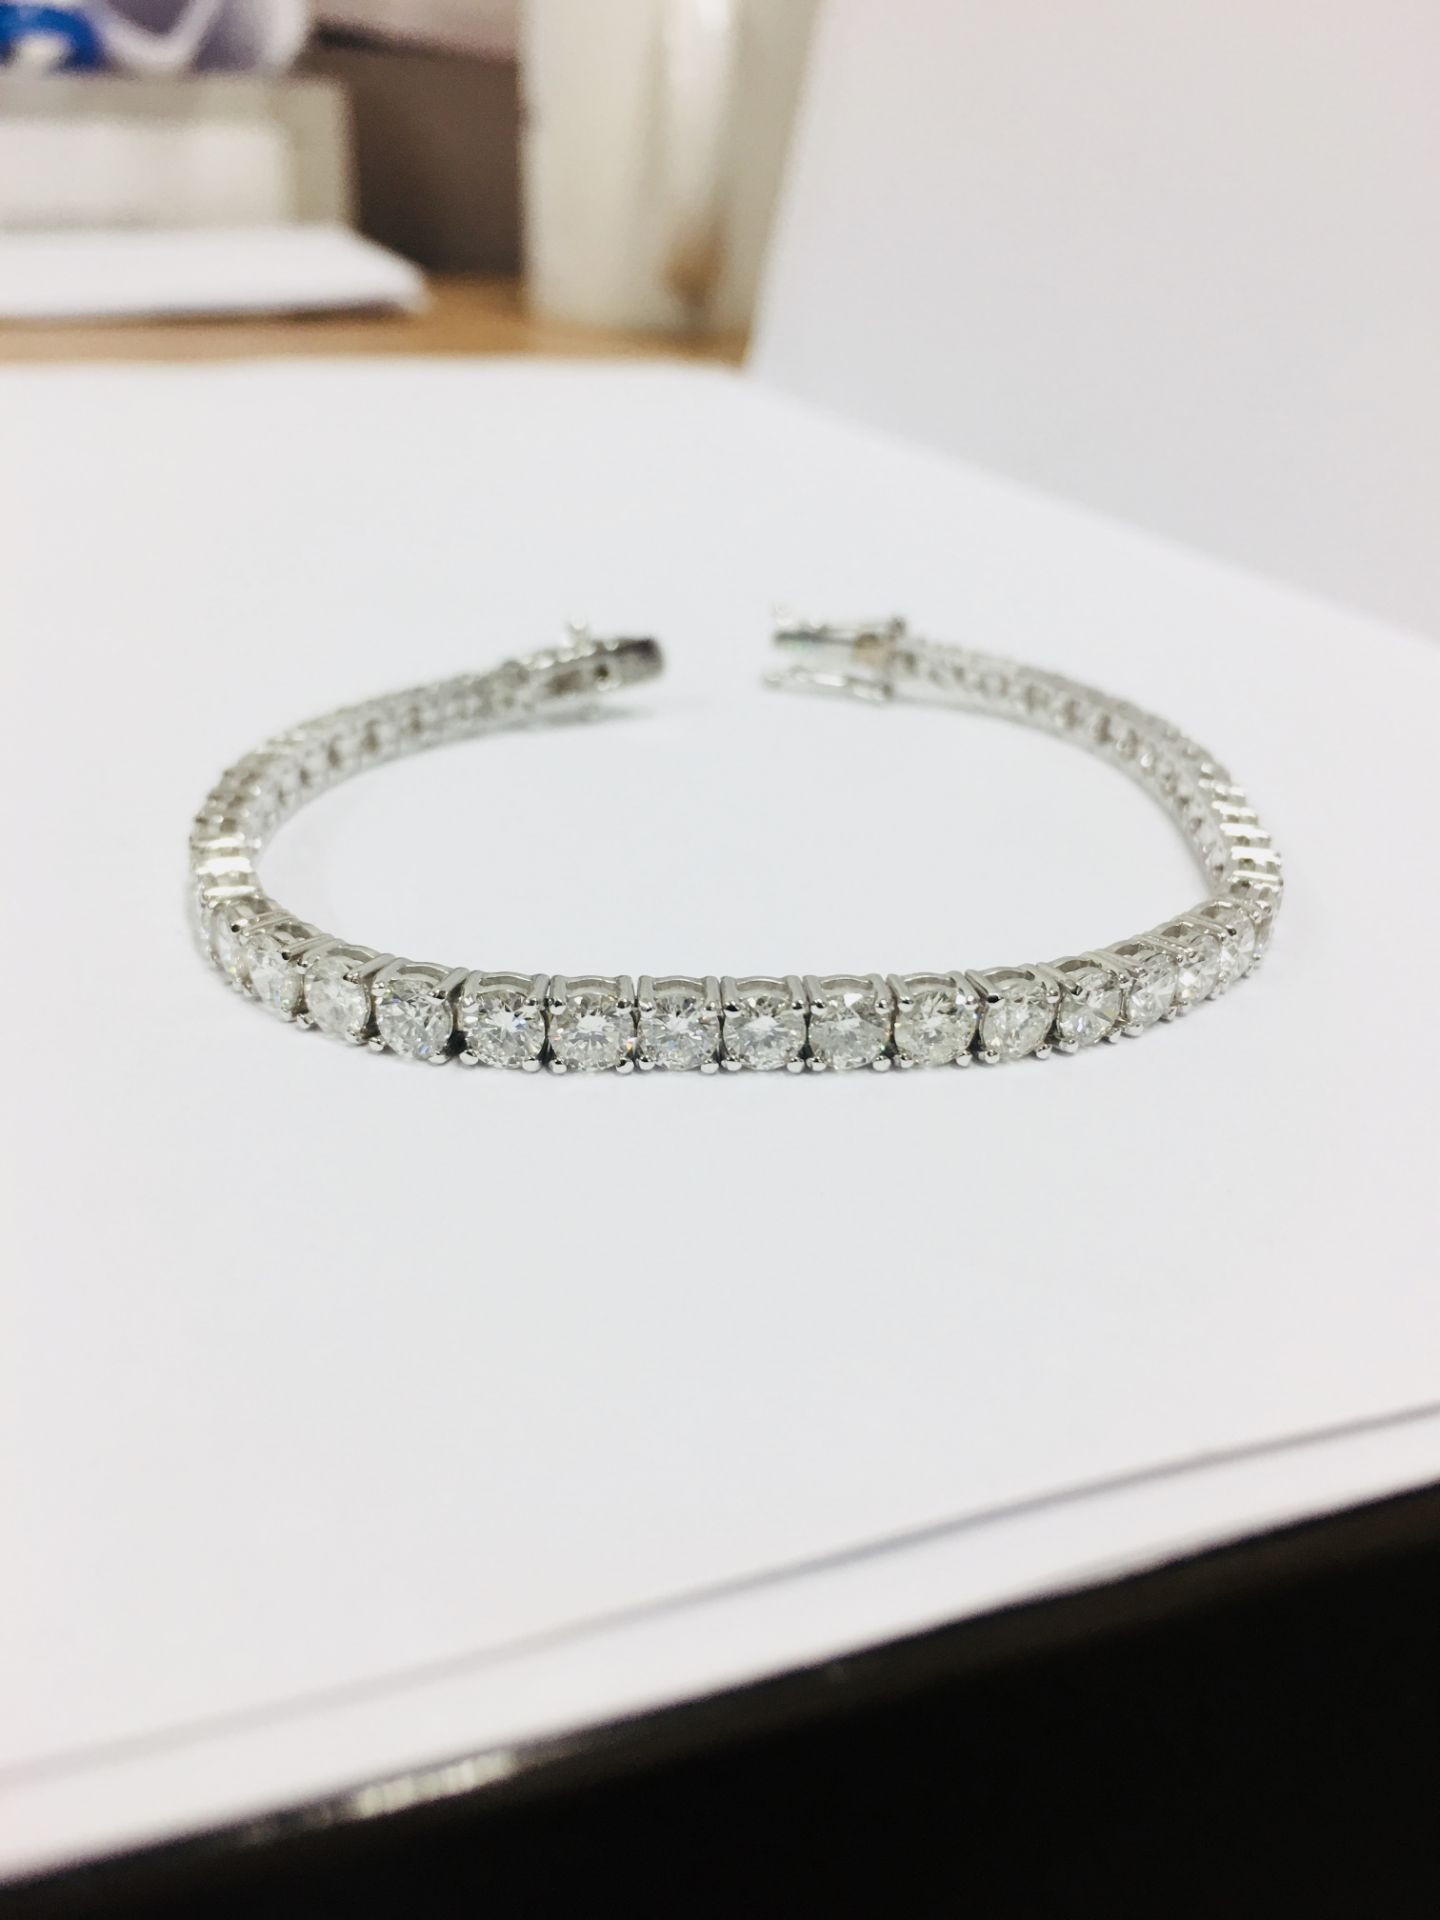 10.50ct Diamond tennis bracelet set with brilliant cut diamonds of I colour, si2 clarity. All set in - Image 4 of 7